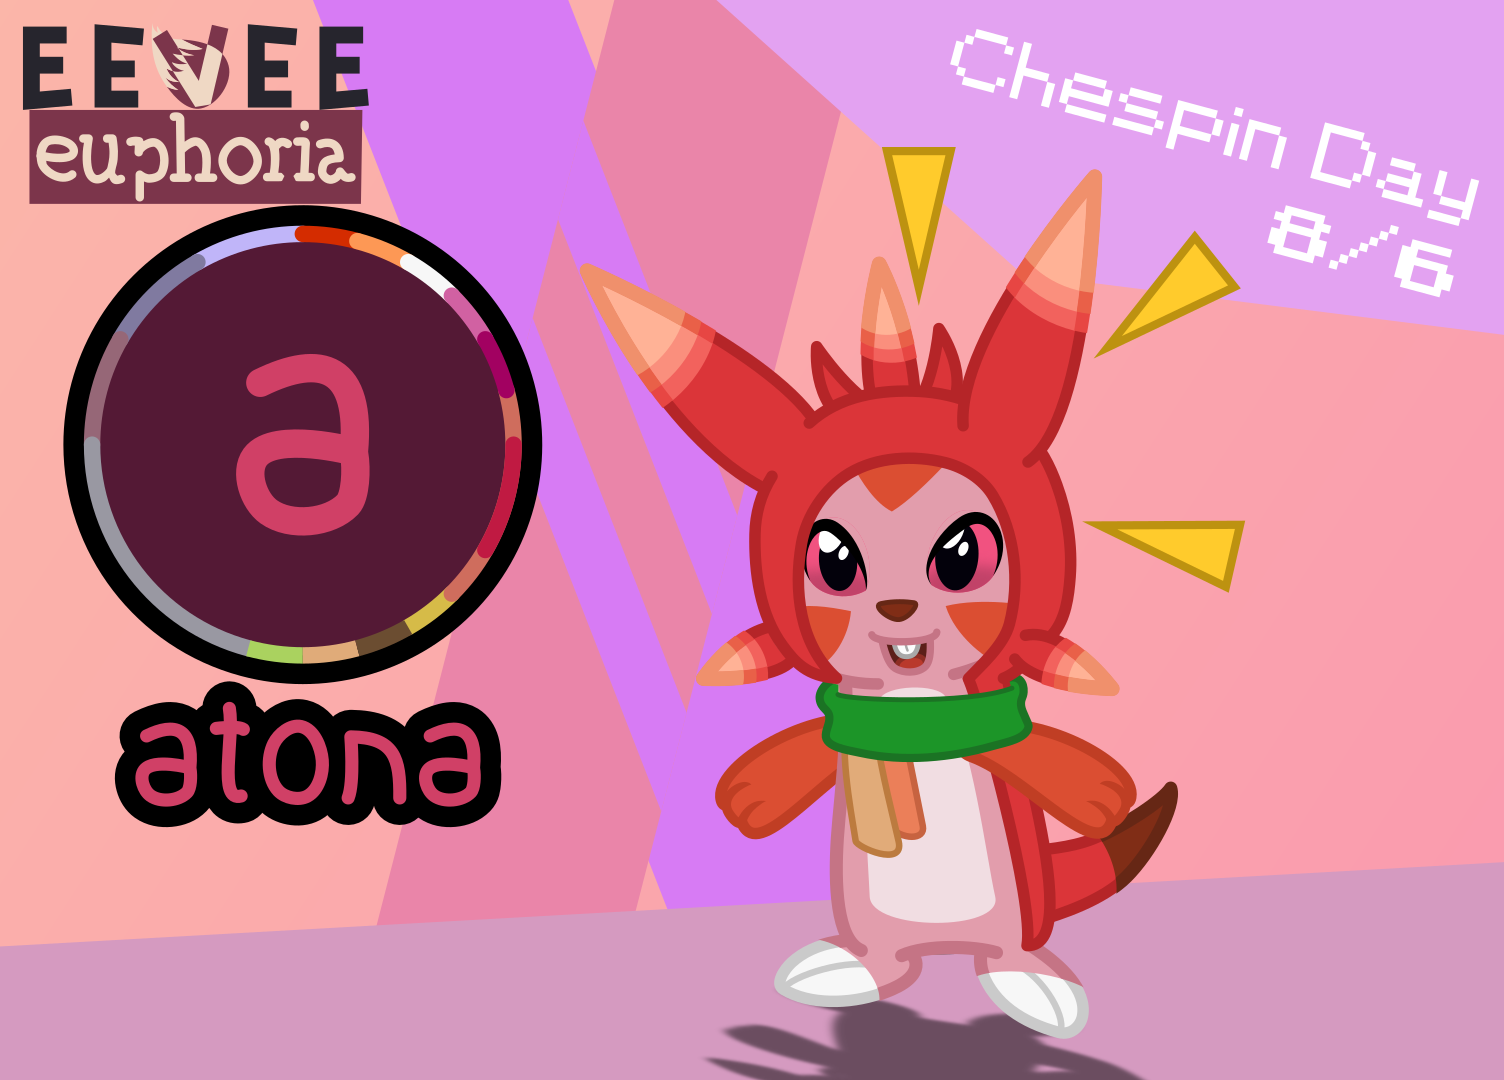 A chespin does a funny lil growl!